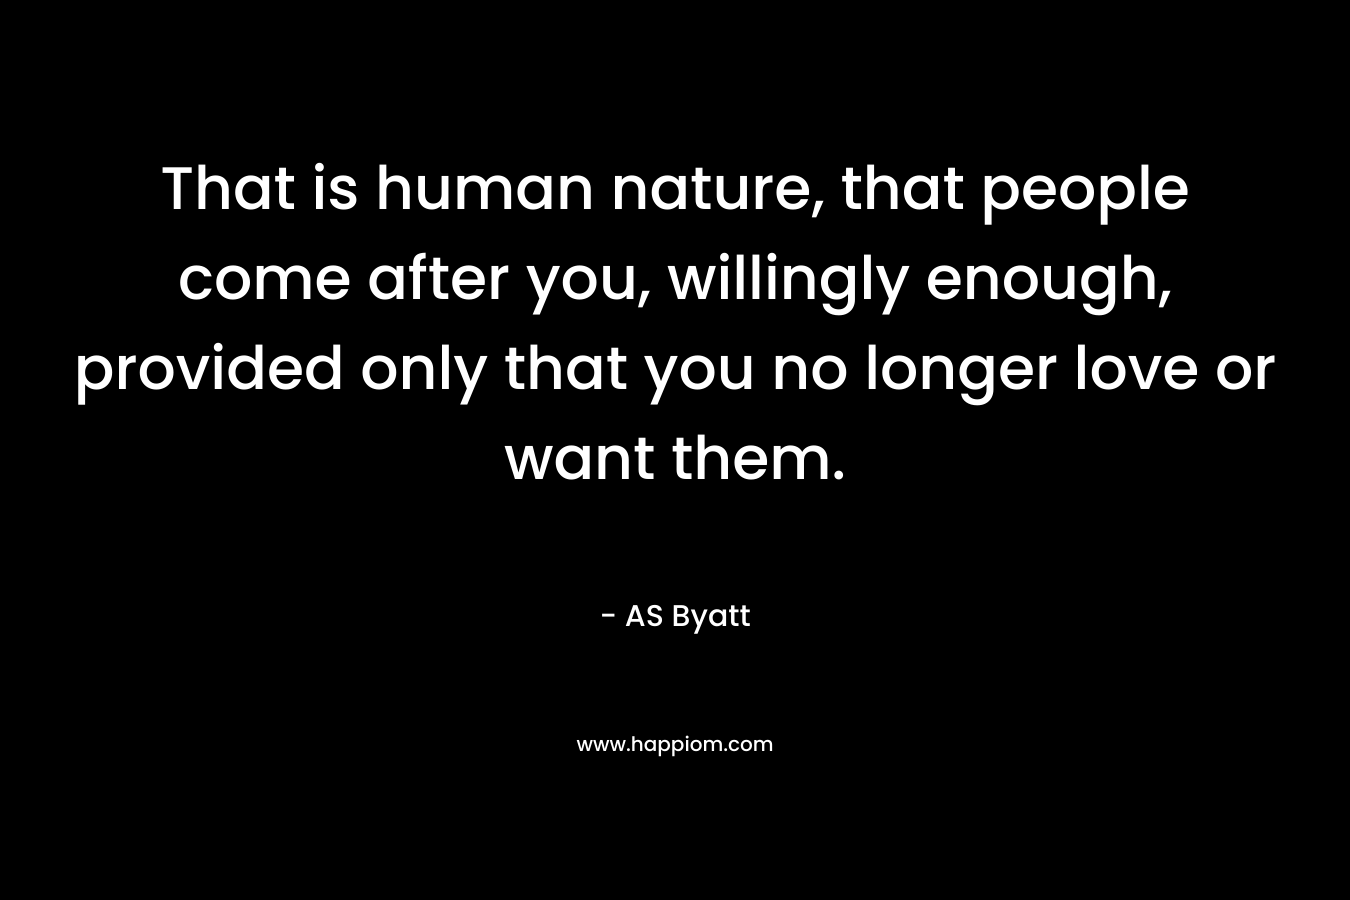 That is human nature, that people come after you, willingly enough, provided only that you no longer love or want them.